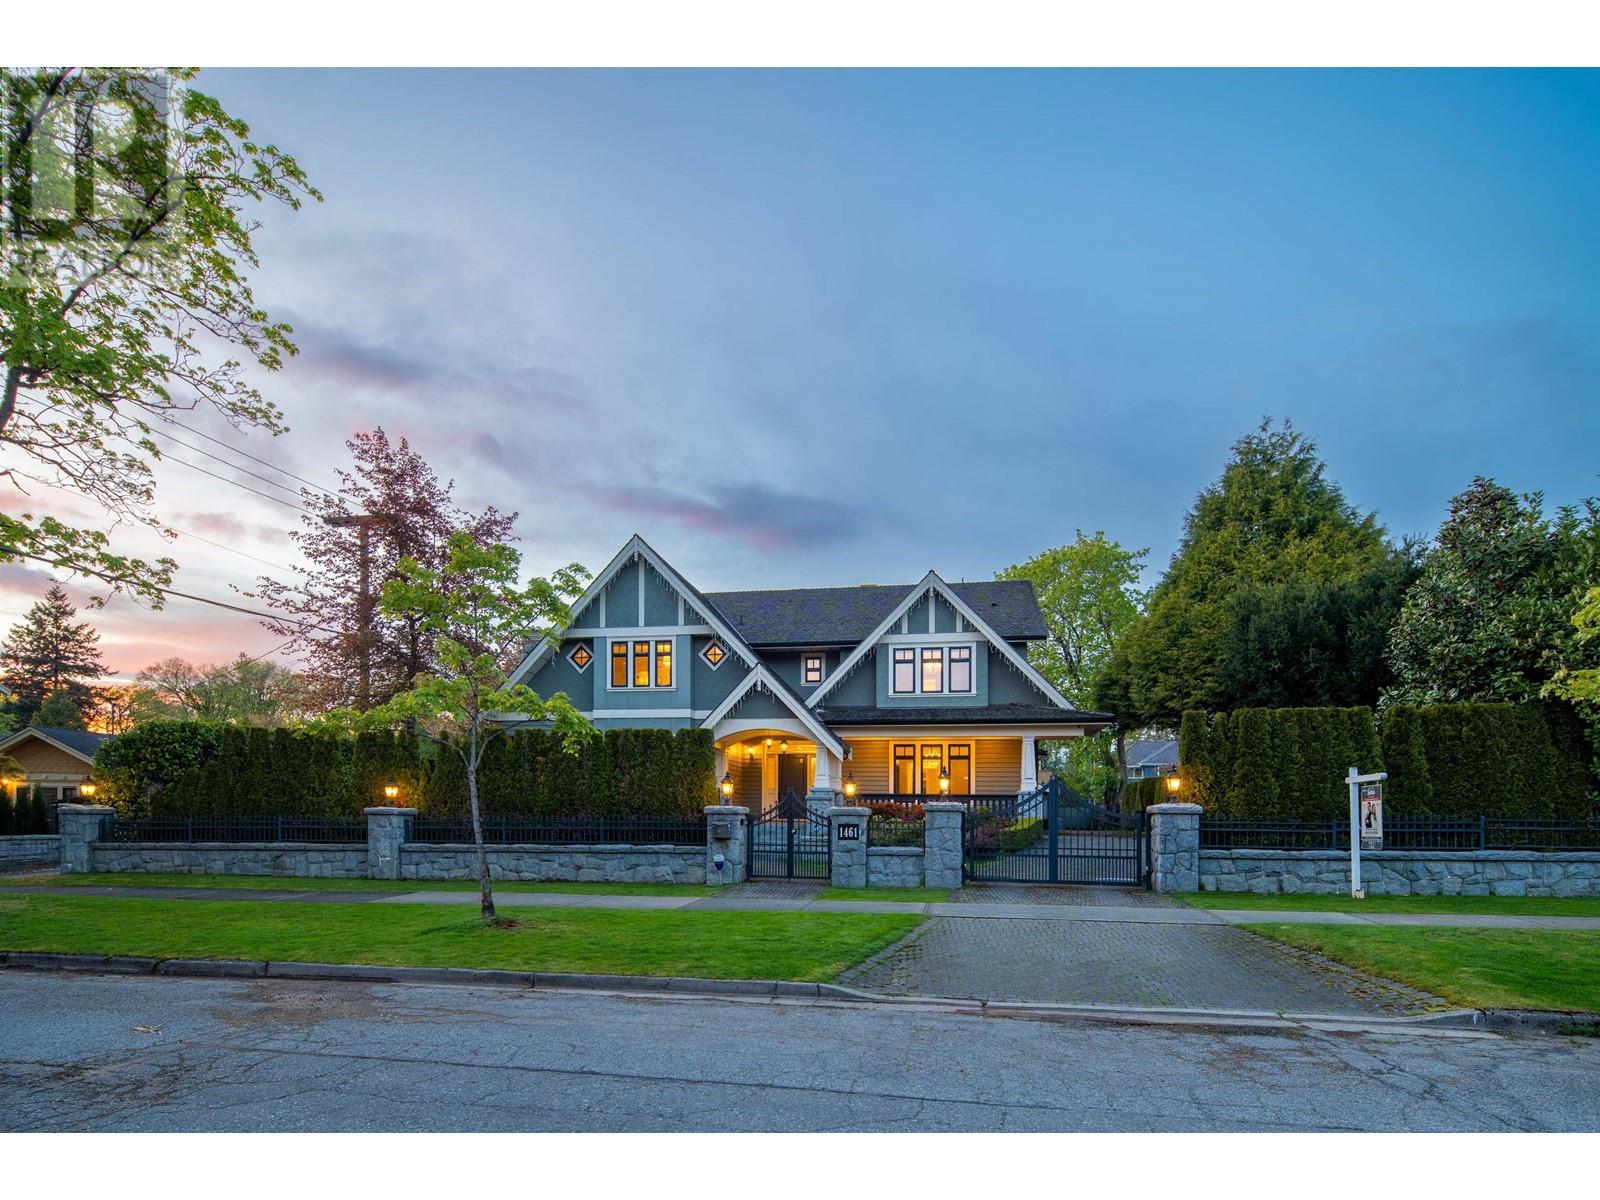 1461 CONNAUGHT DRIVE located in Vancouver, British Columbia